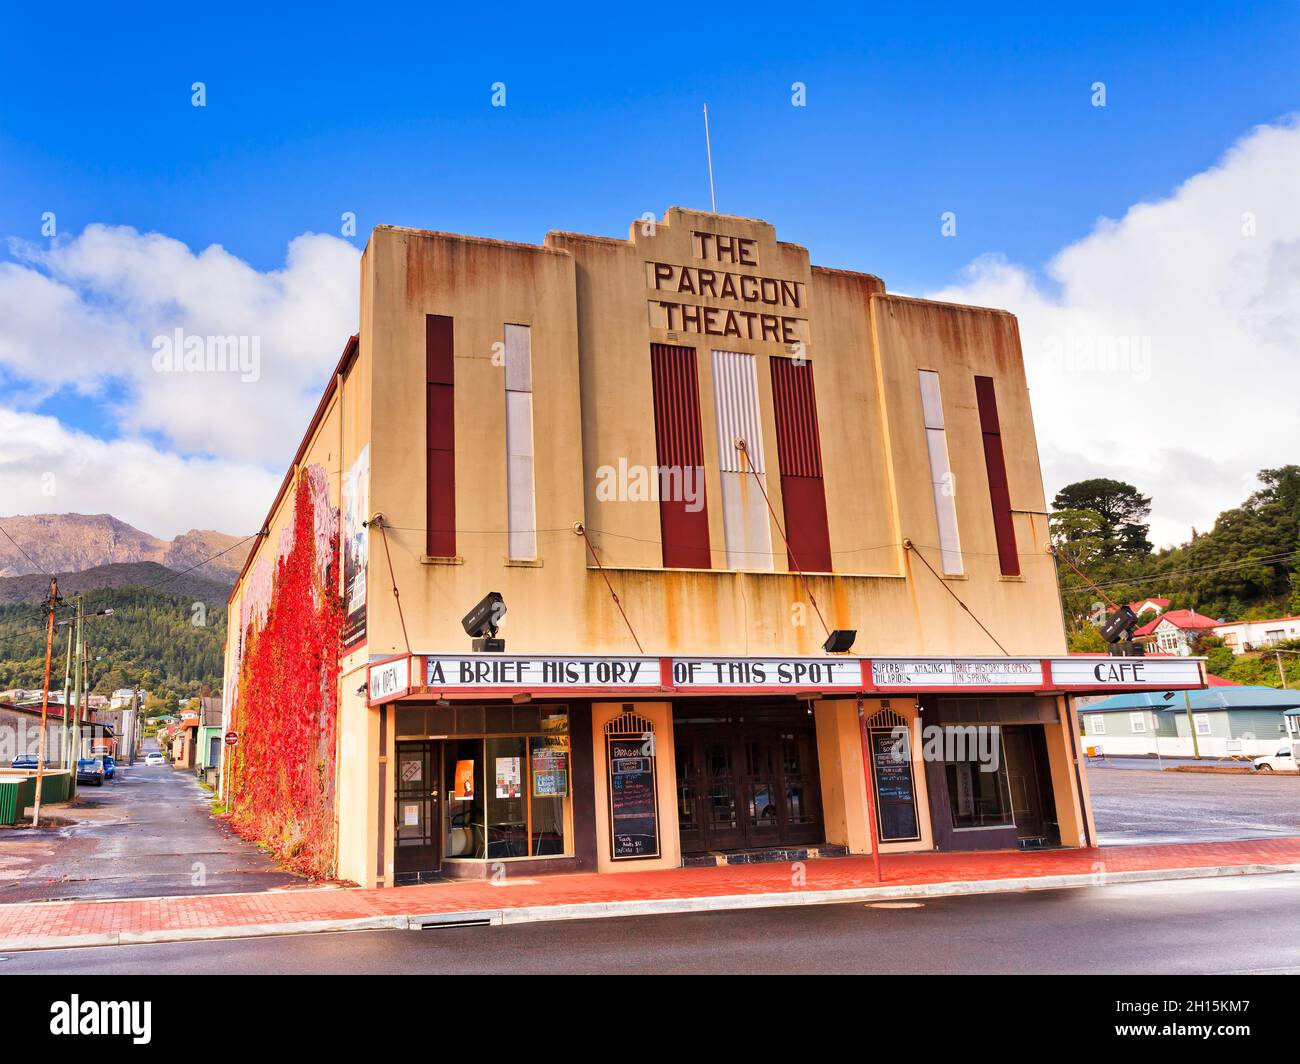 Queenstown, Tasmania - 24 April 2014: Facade of historic The Paragon Theatre under blue sky in old mining town of regional Australia. Stock Photo